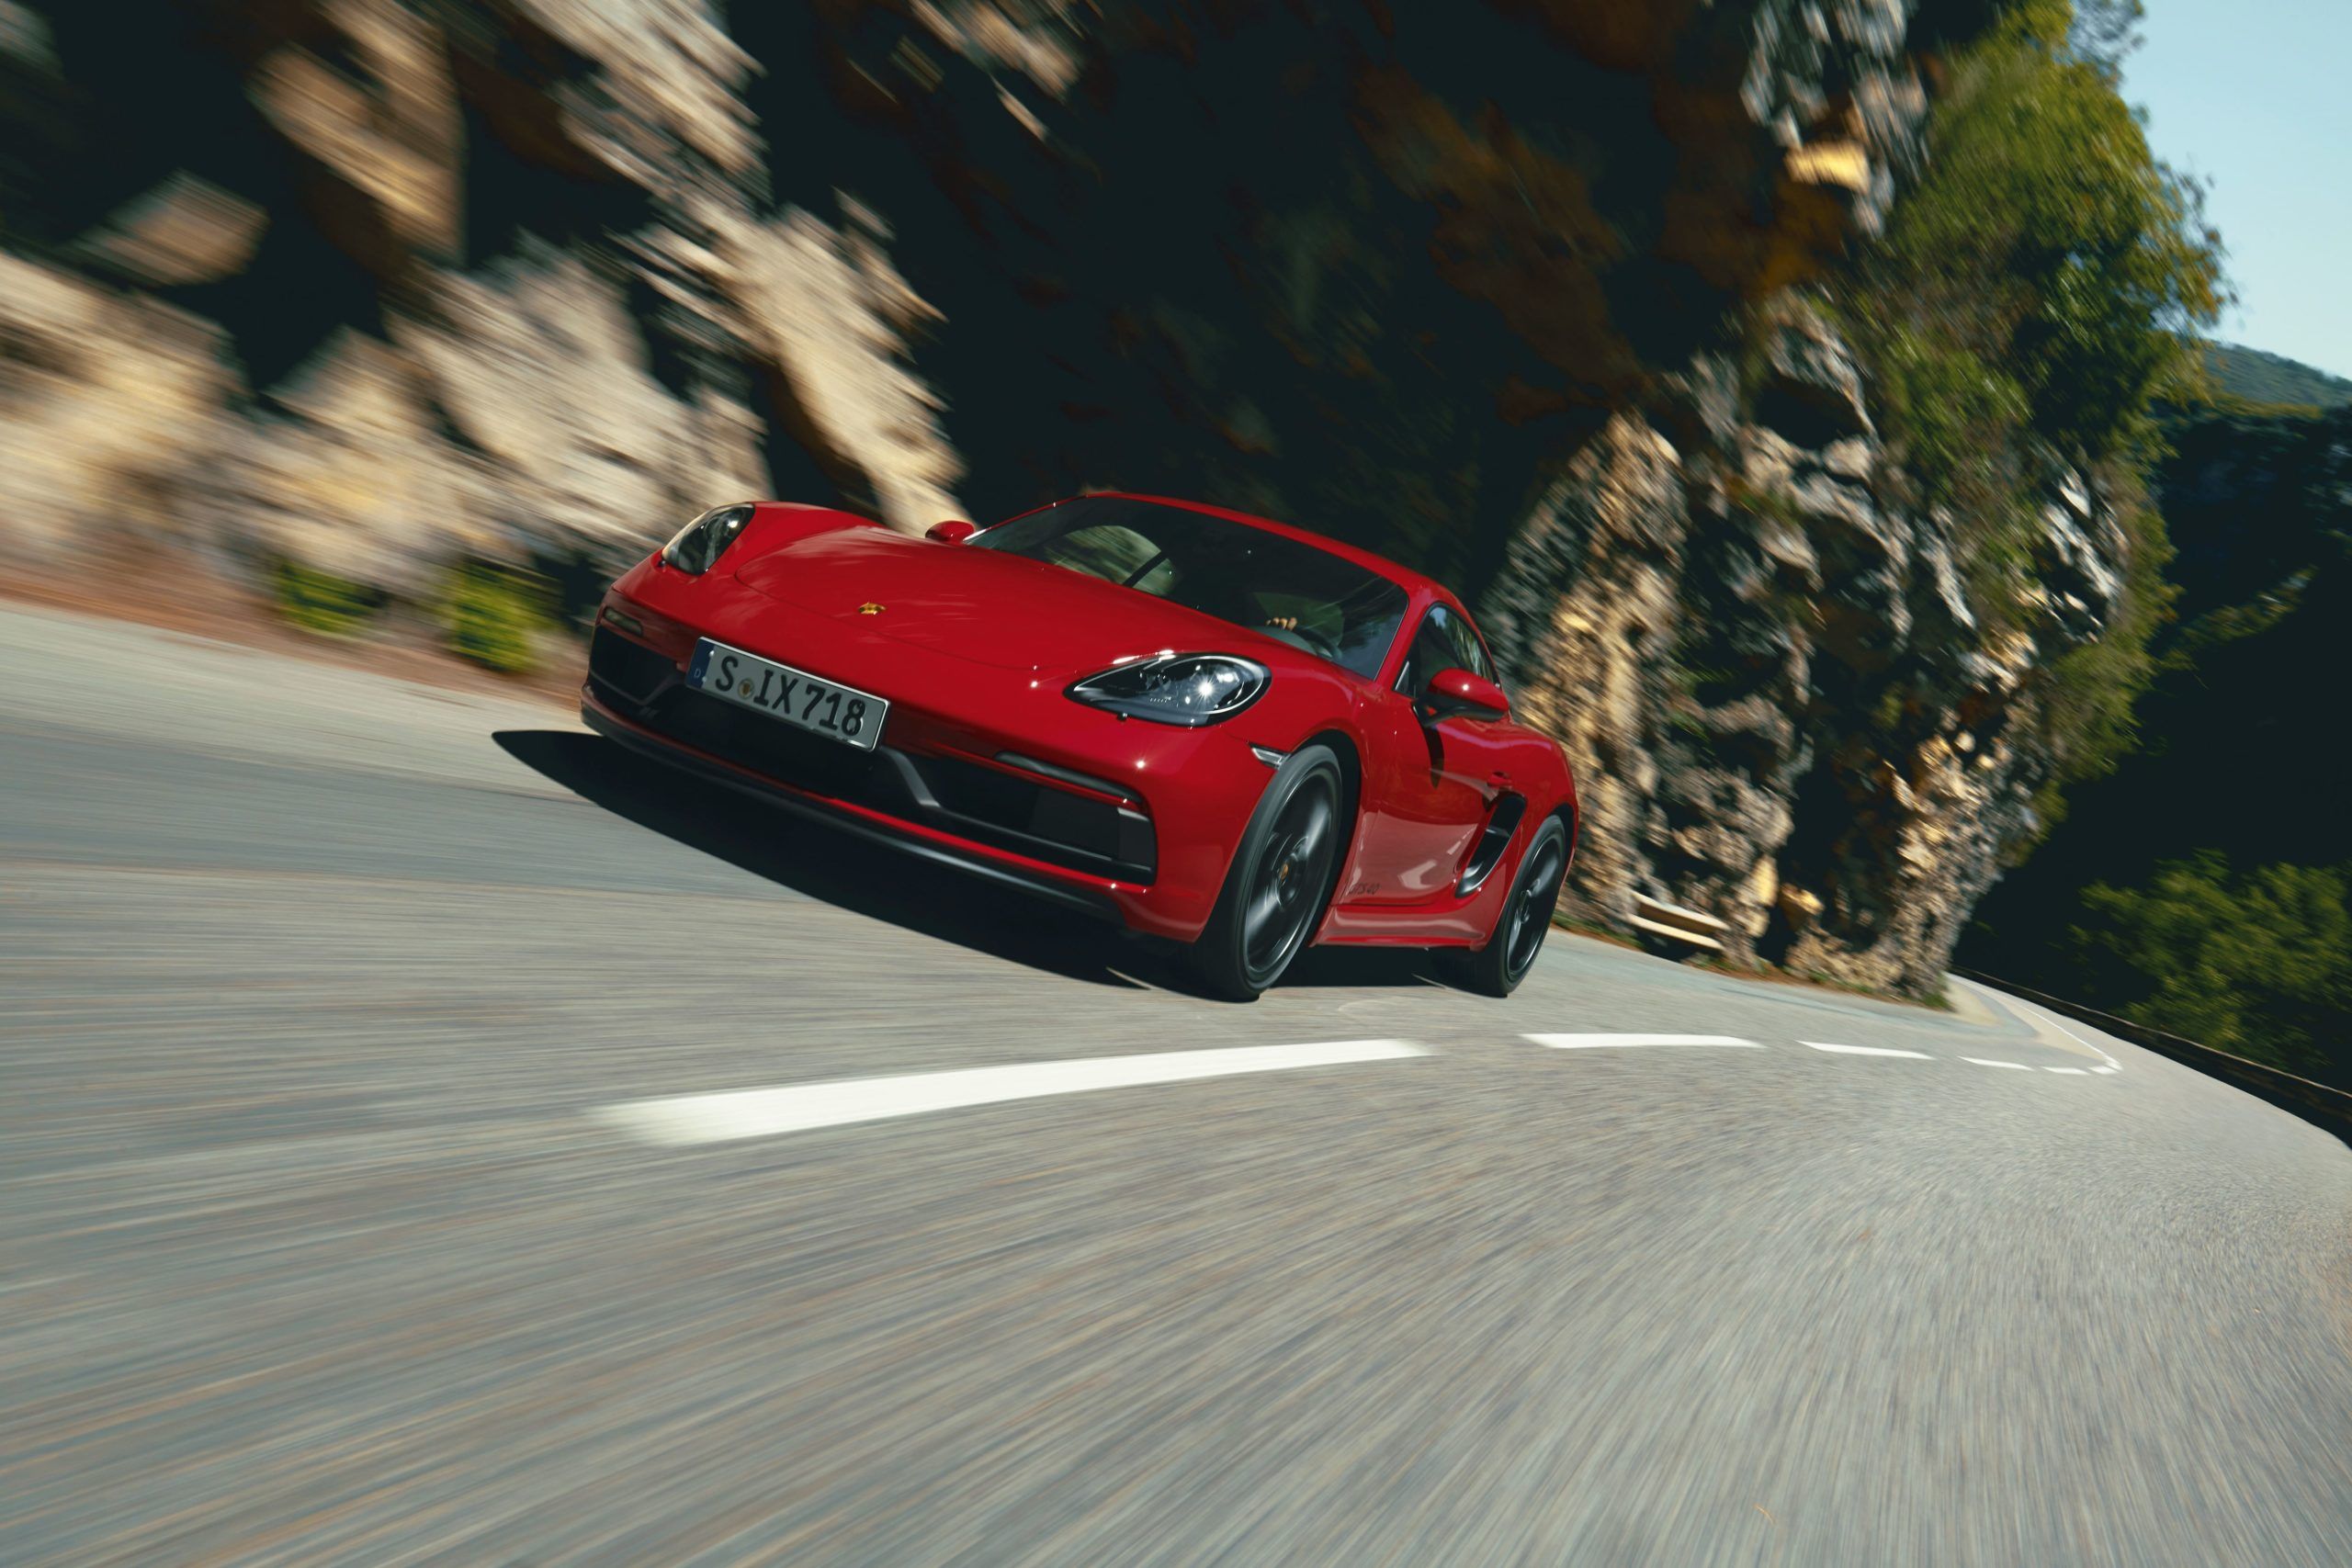 Chasing The Redline With The Porsche 718 Cayman Gts 4 0